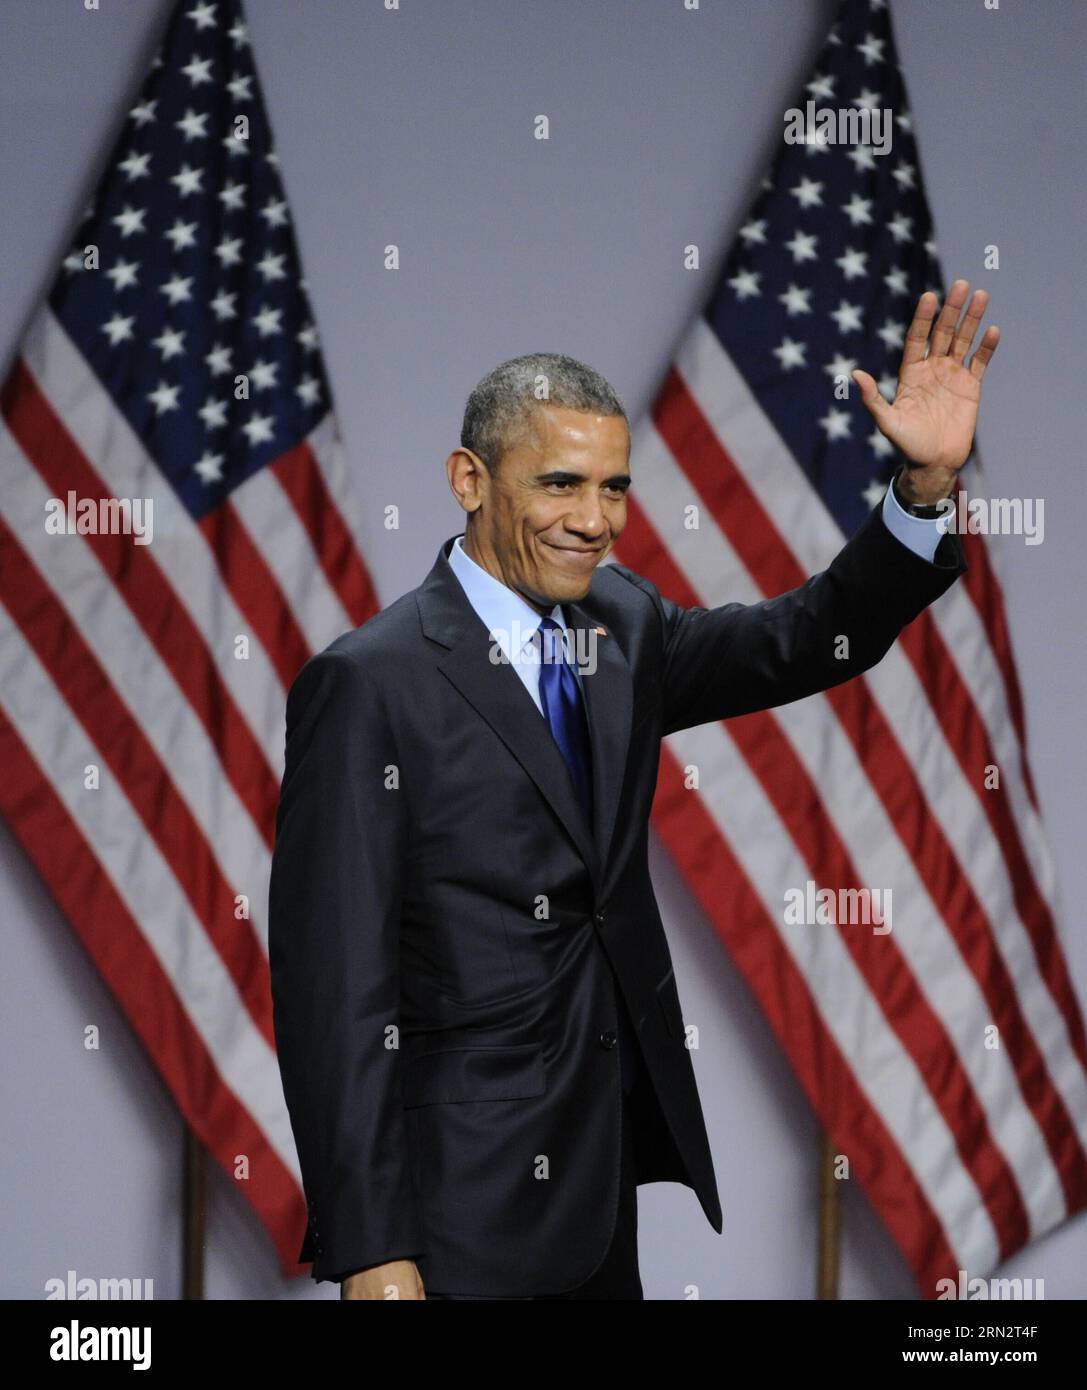 (150323) -- WASHINGTON D.C., March 23, 2015 -- U.S. President Barack Obama greets audiences during the 2015 SelectUSA Investment Summit in Washington D.C., capital of the United States, March 23, 2015.U.S. President Barack Obama on Monday announced a series of new measures to lure more foreign investment and bolster economic recovery. ) U.S.-WASHINGTON D.C.-SELECTUSA-INVESTMENT SUMMIT BaoxDandan PUBLICATIONxNOTxINxCHN   Washington D C March 23 2015 U S President Barack Obama greets audiences during The 2015  Investment Summit in Washington D C Capital of The United States March 23 2015 U S Pre Stock Photo